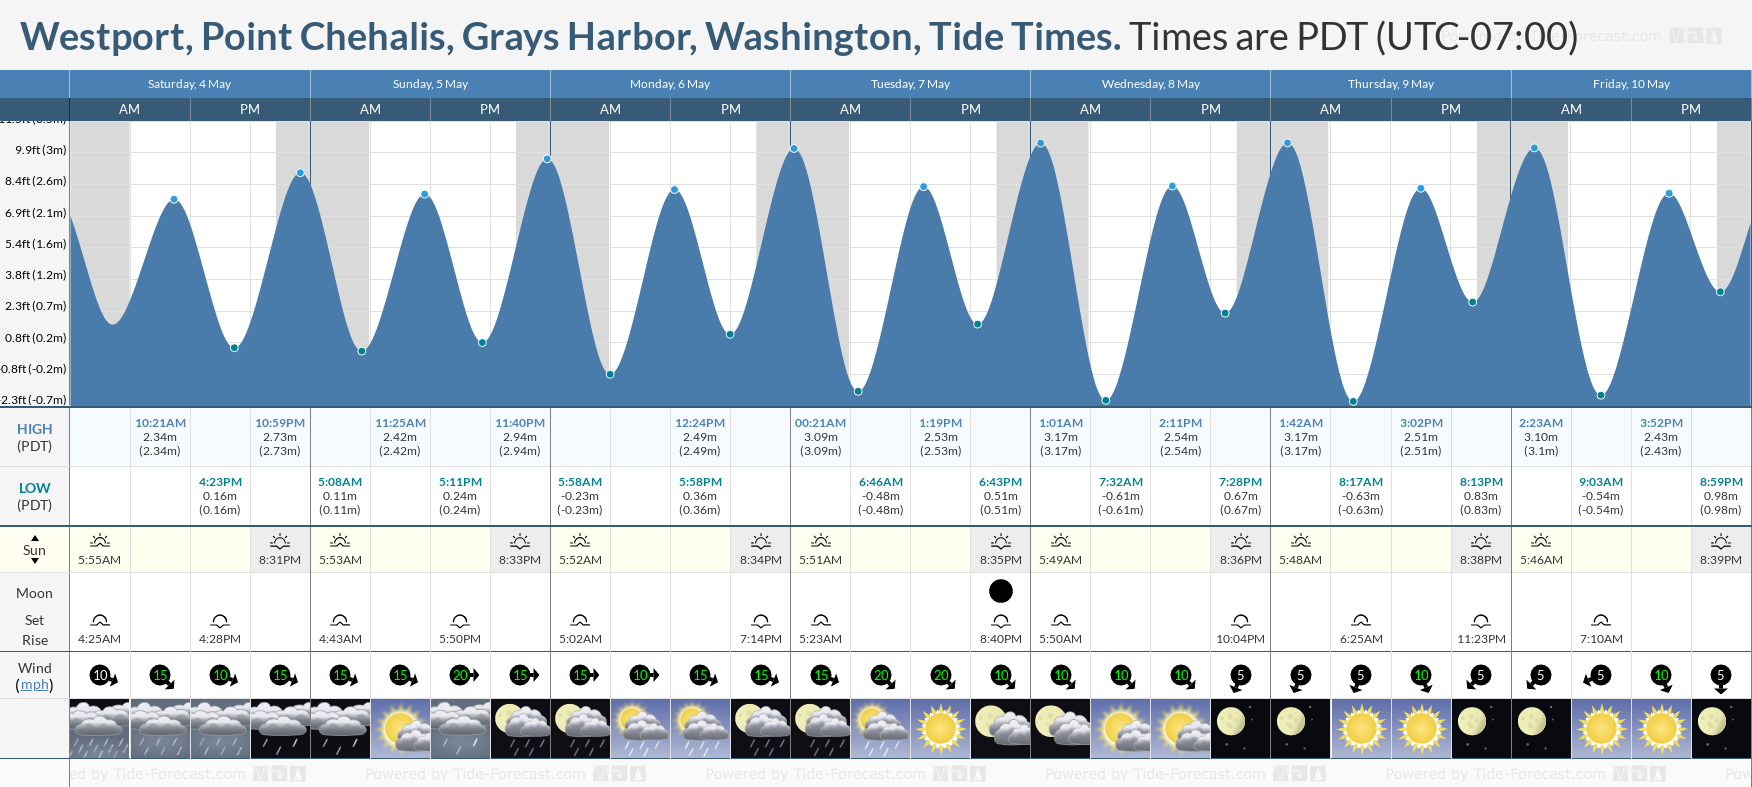 Westport, Point Chehalis, Grays Harbor, Washington Tide Chart including high and low tide times for the next 7 days